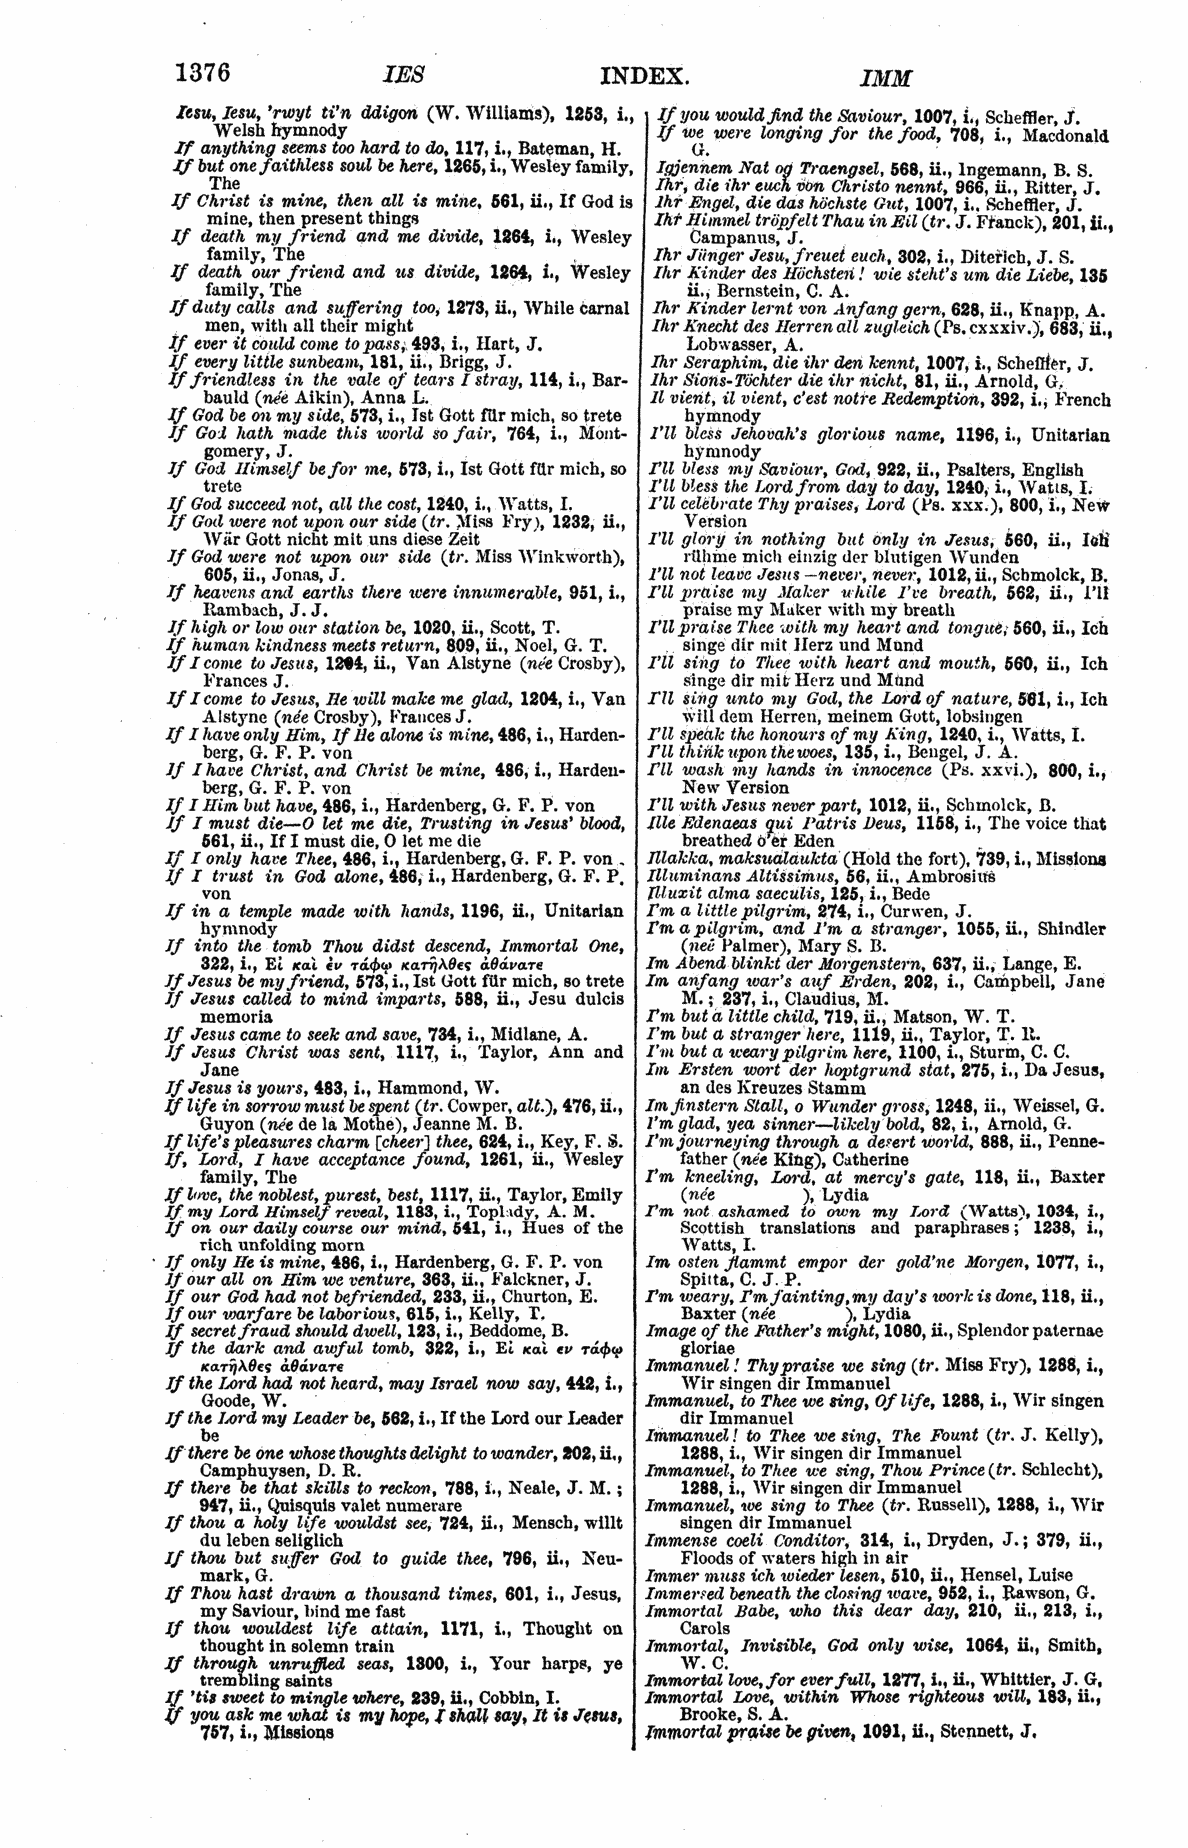 Image of page 1376